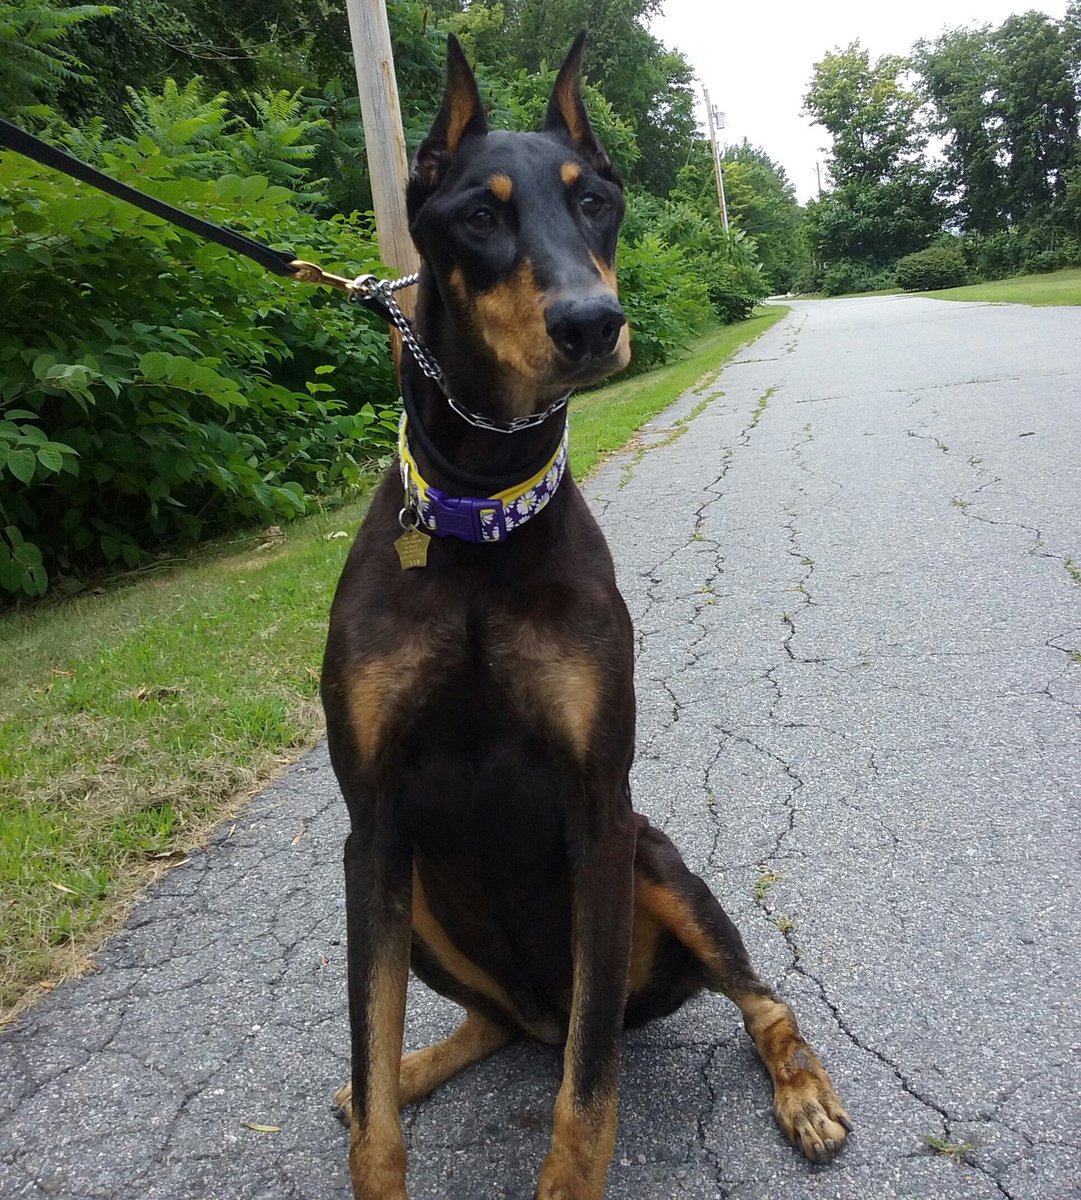 #doberman #shelterdog #animaltraining  #dogs #dogtrainer #dogtraining This is Roxy one of dogs I work with daily. She is 9 years old and is our resident 'Queen Bee' at Doberman Rescue Unlimited. She is sassy doesnt act her age and trots strutting her stuff. Available and awesome